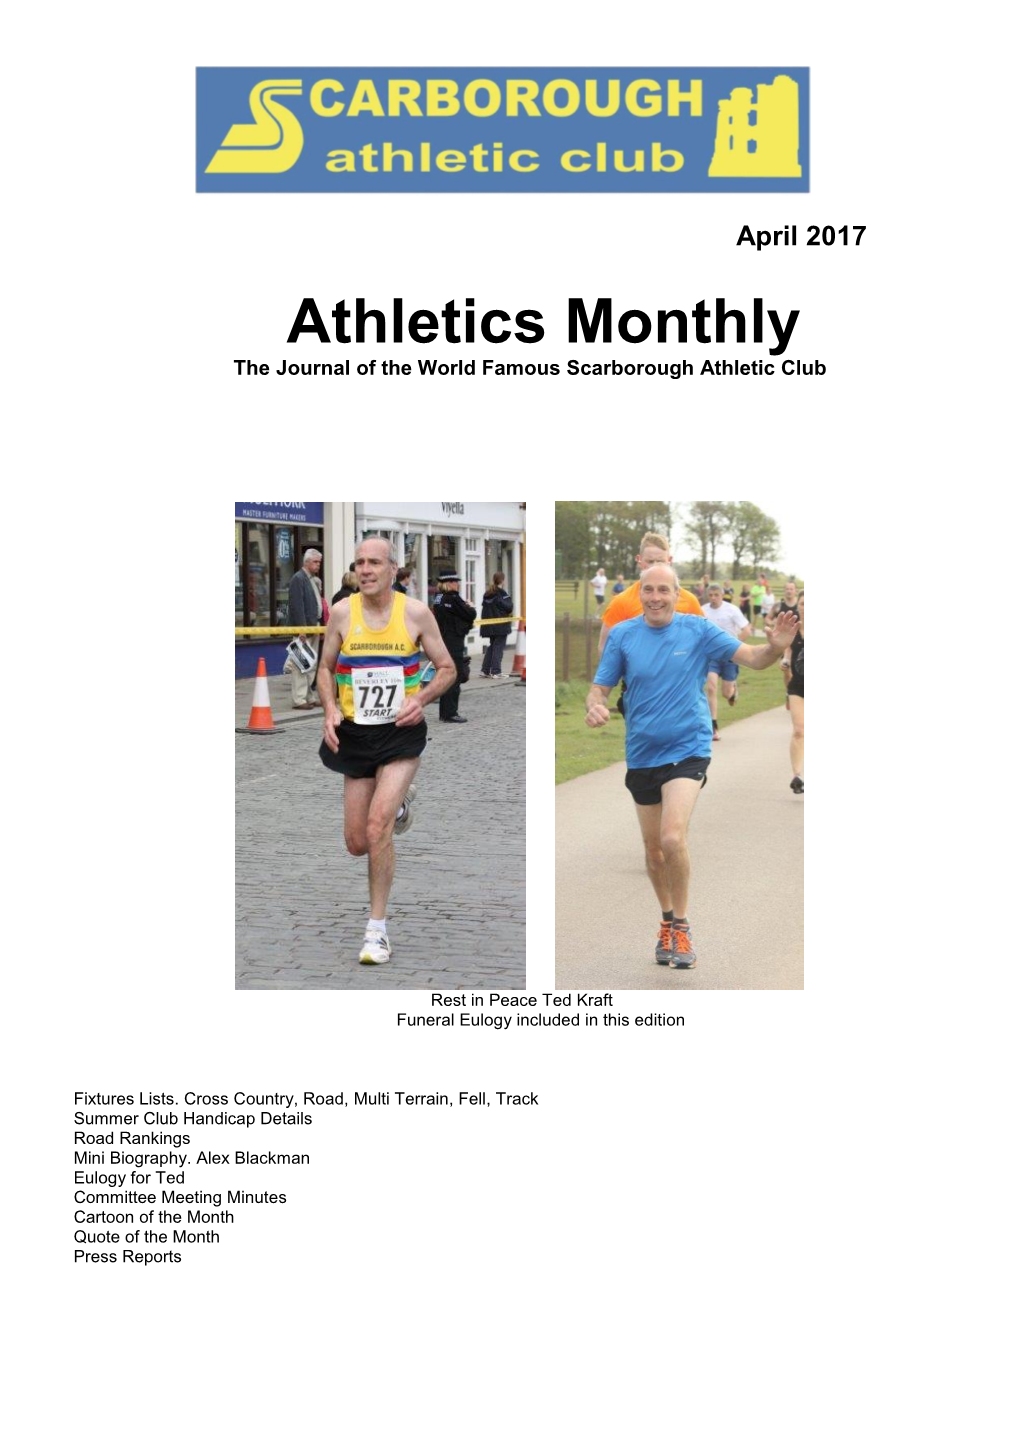 Athletics Monthly the Journal of the World Famous Scarborough Athletic Club